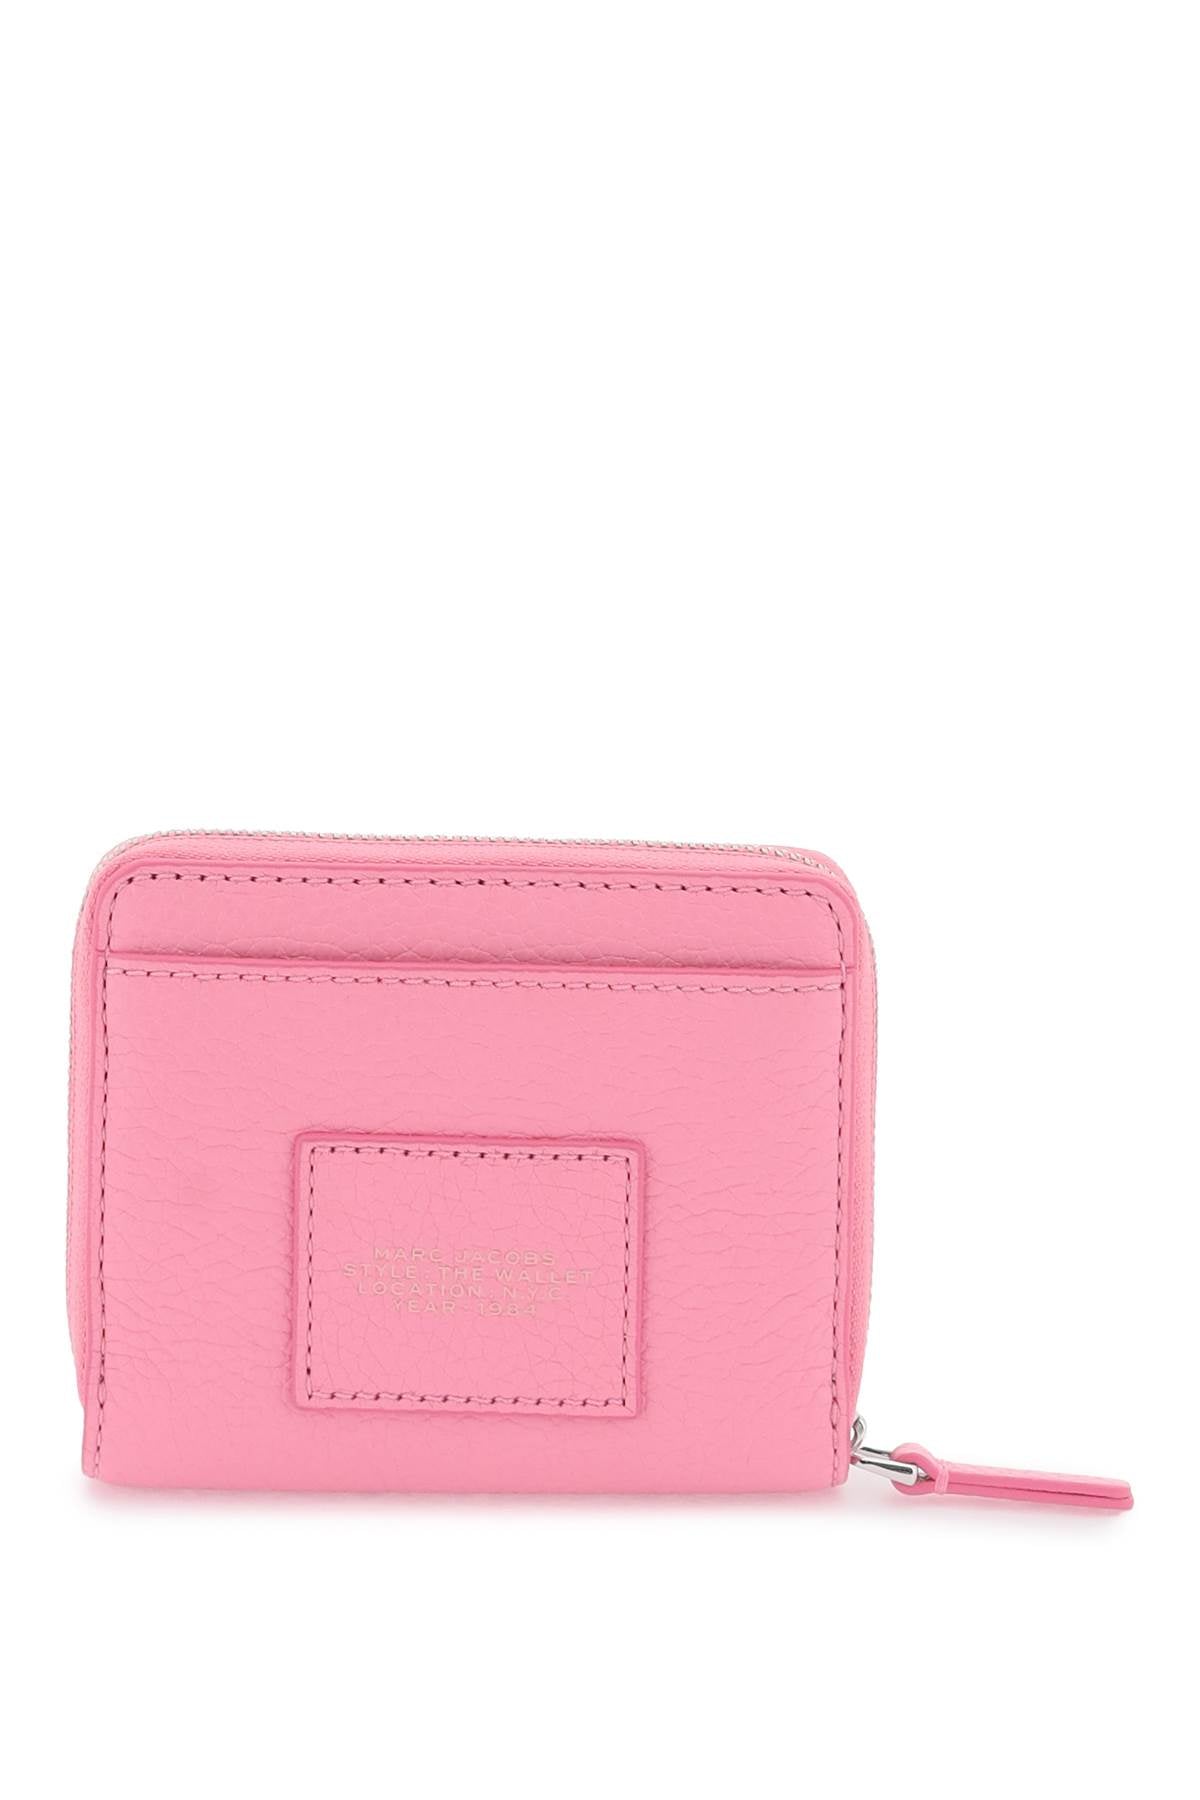 Marc Jacobs The Leather Mini Compact Wallet   Pink